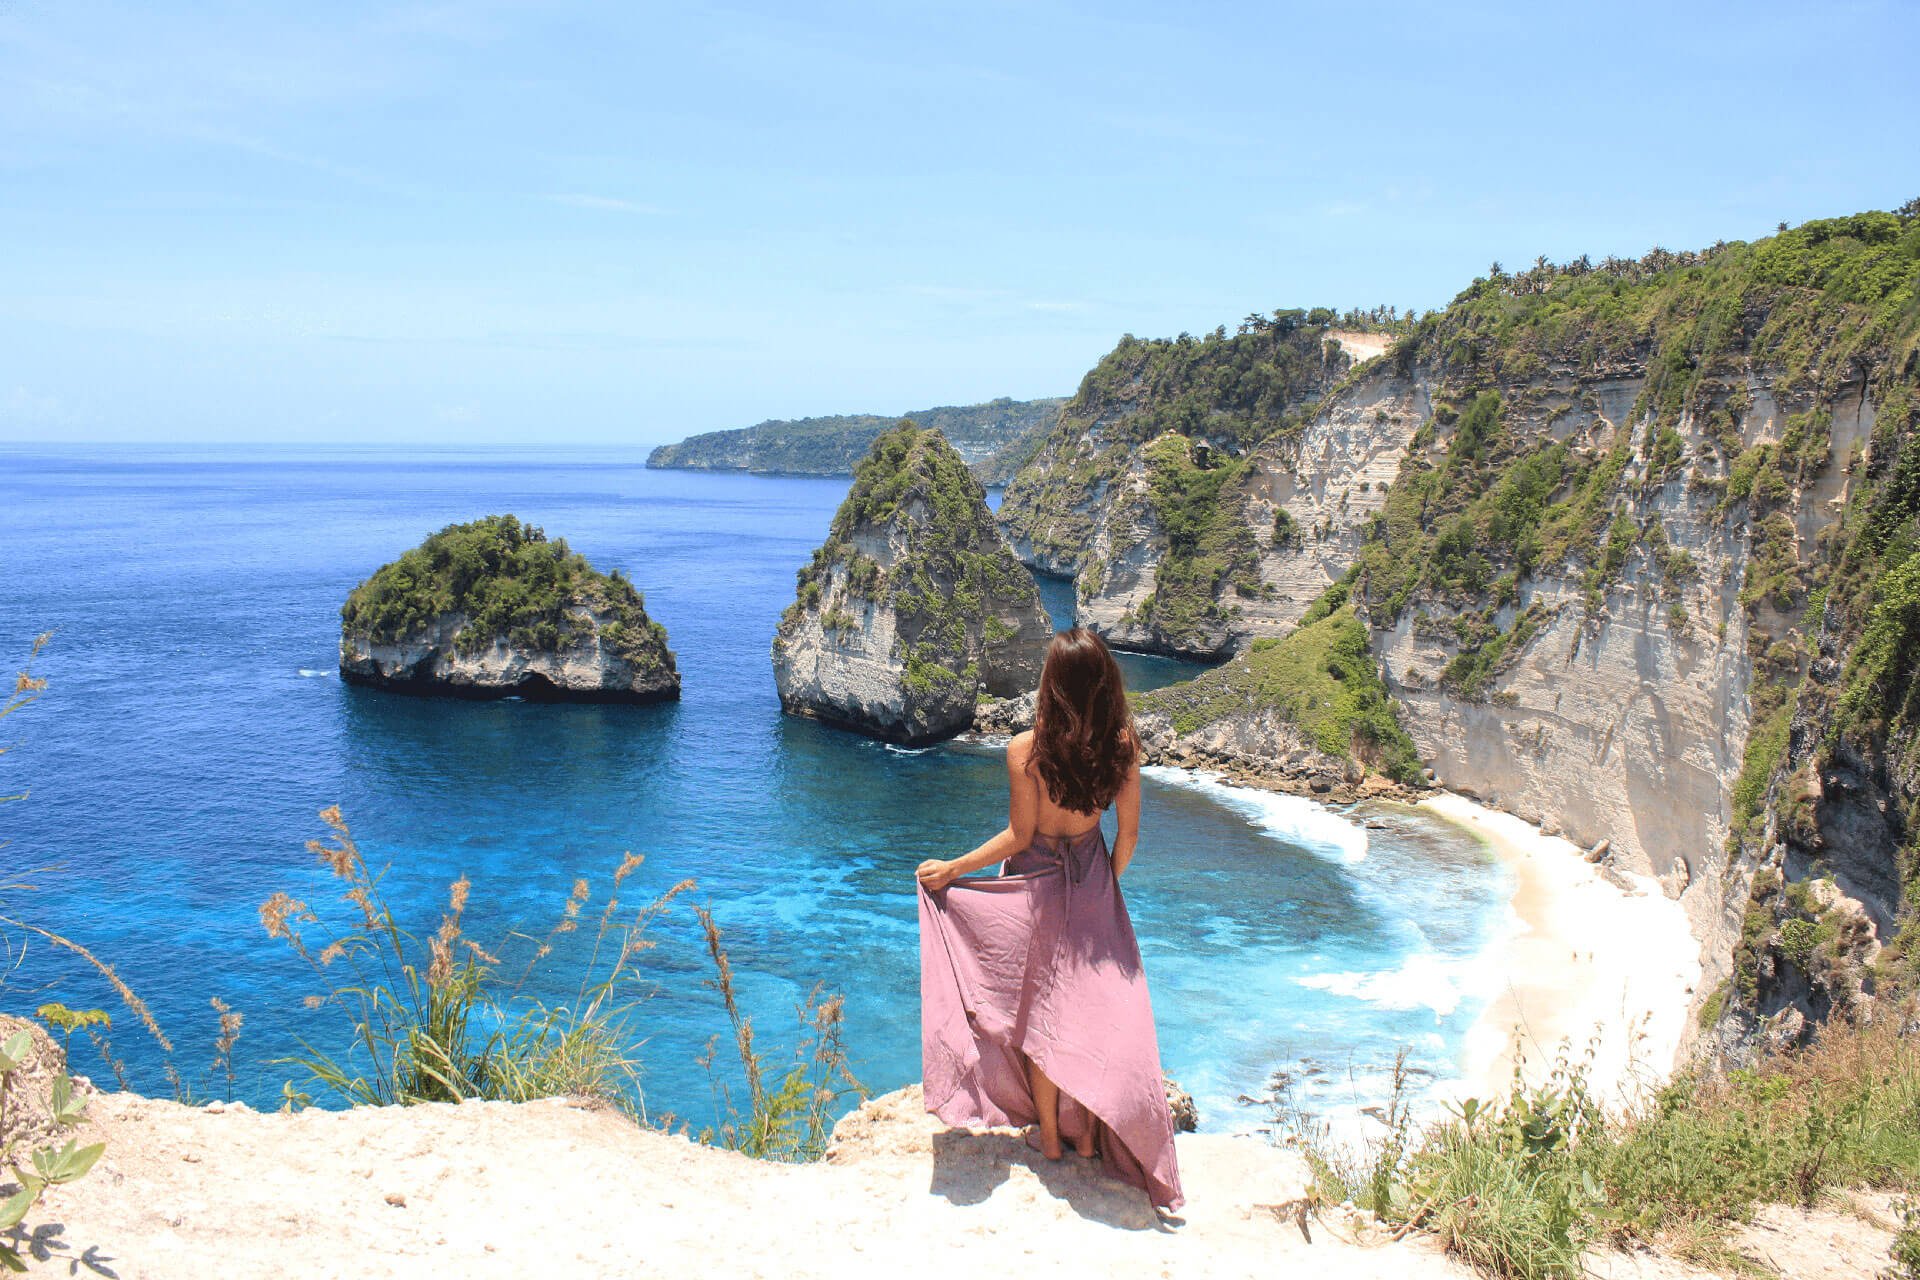 Nusa Penida Tour - The Best Itinerary for your Trip to Nusa Penida